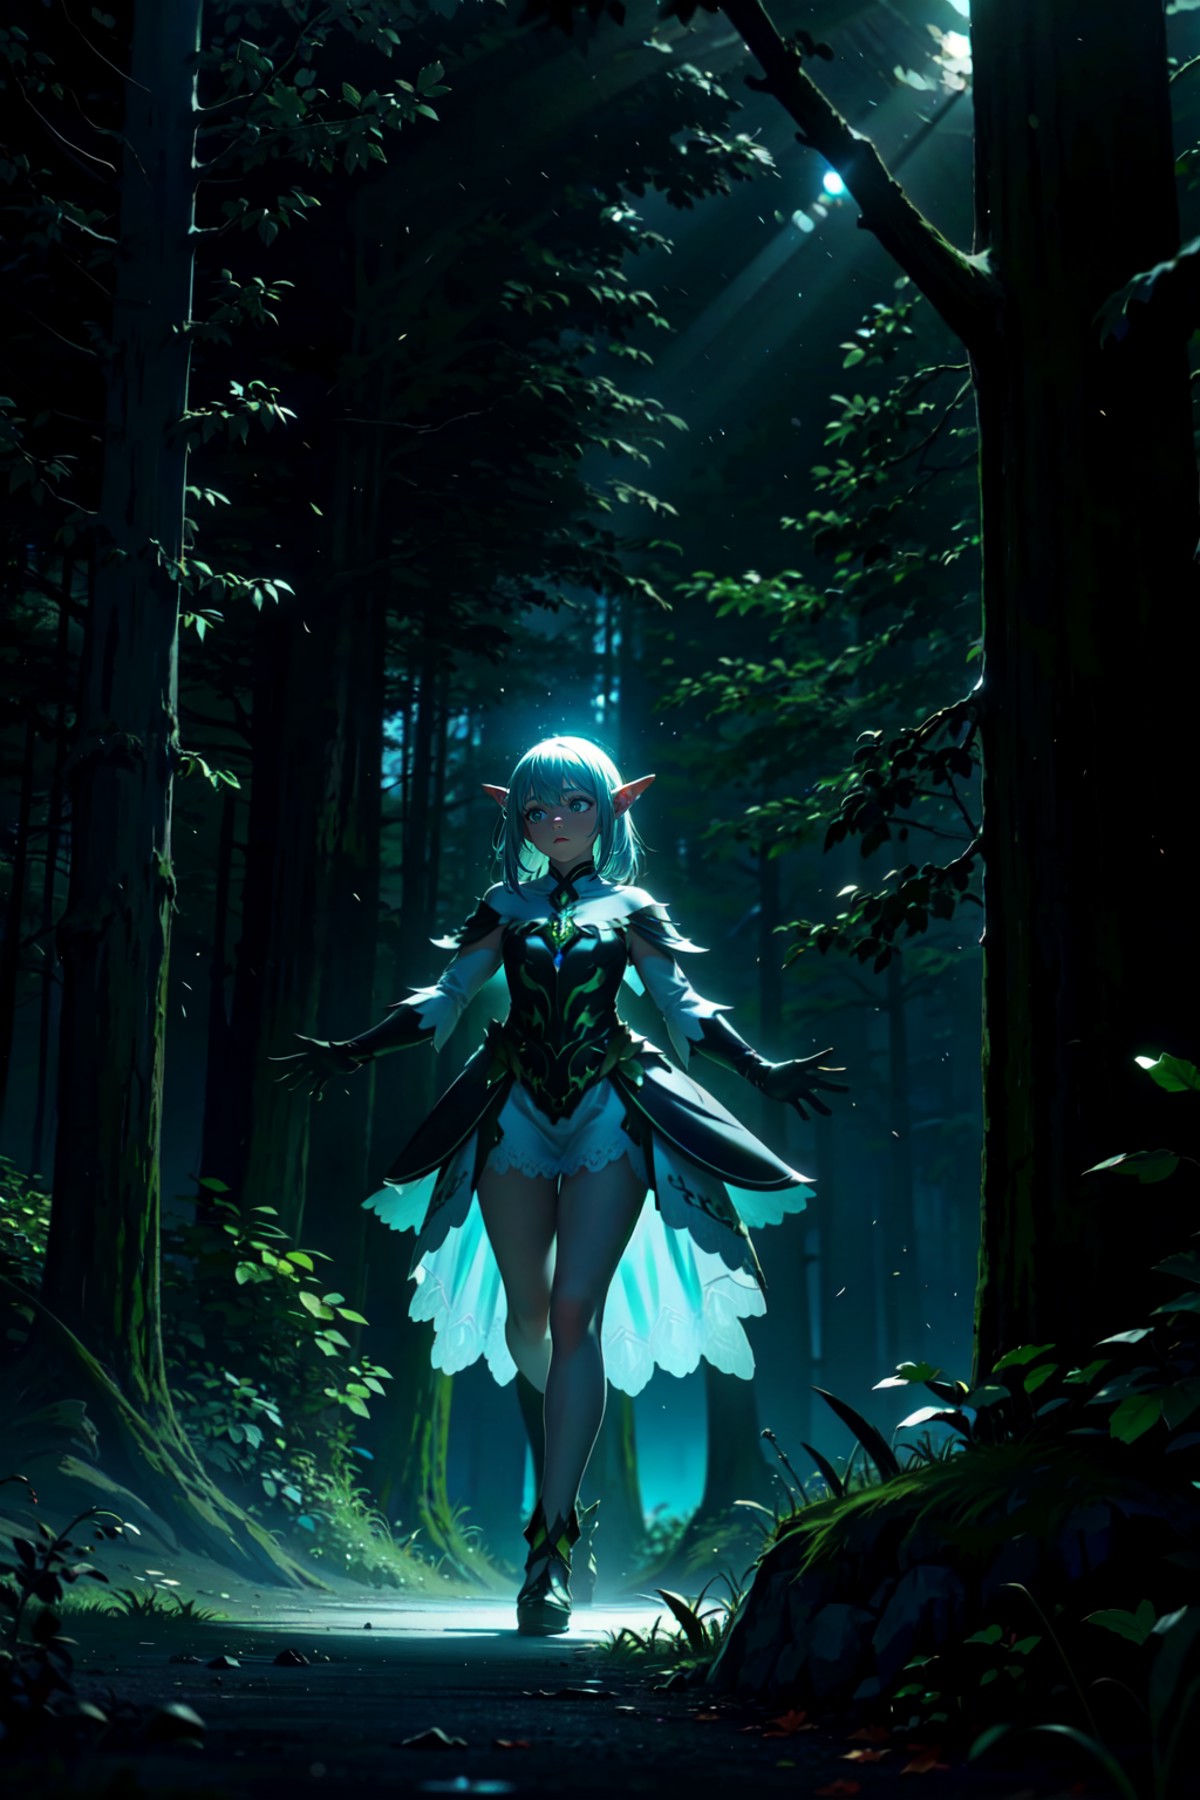 an elf ventures stealthily through a moonlit forest, shrouded in darkness. Bathed in the ethereal glow of iridescent light...